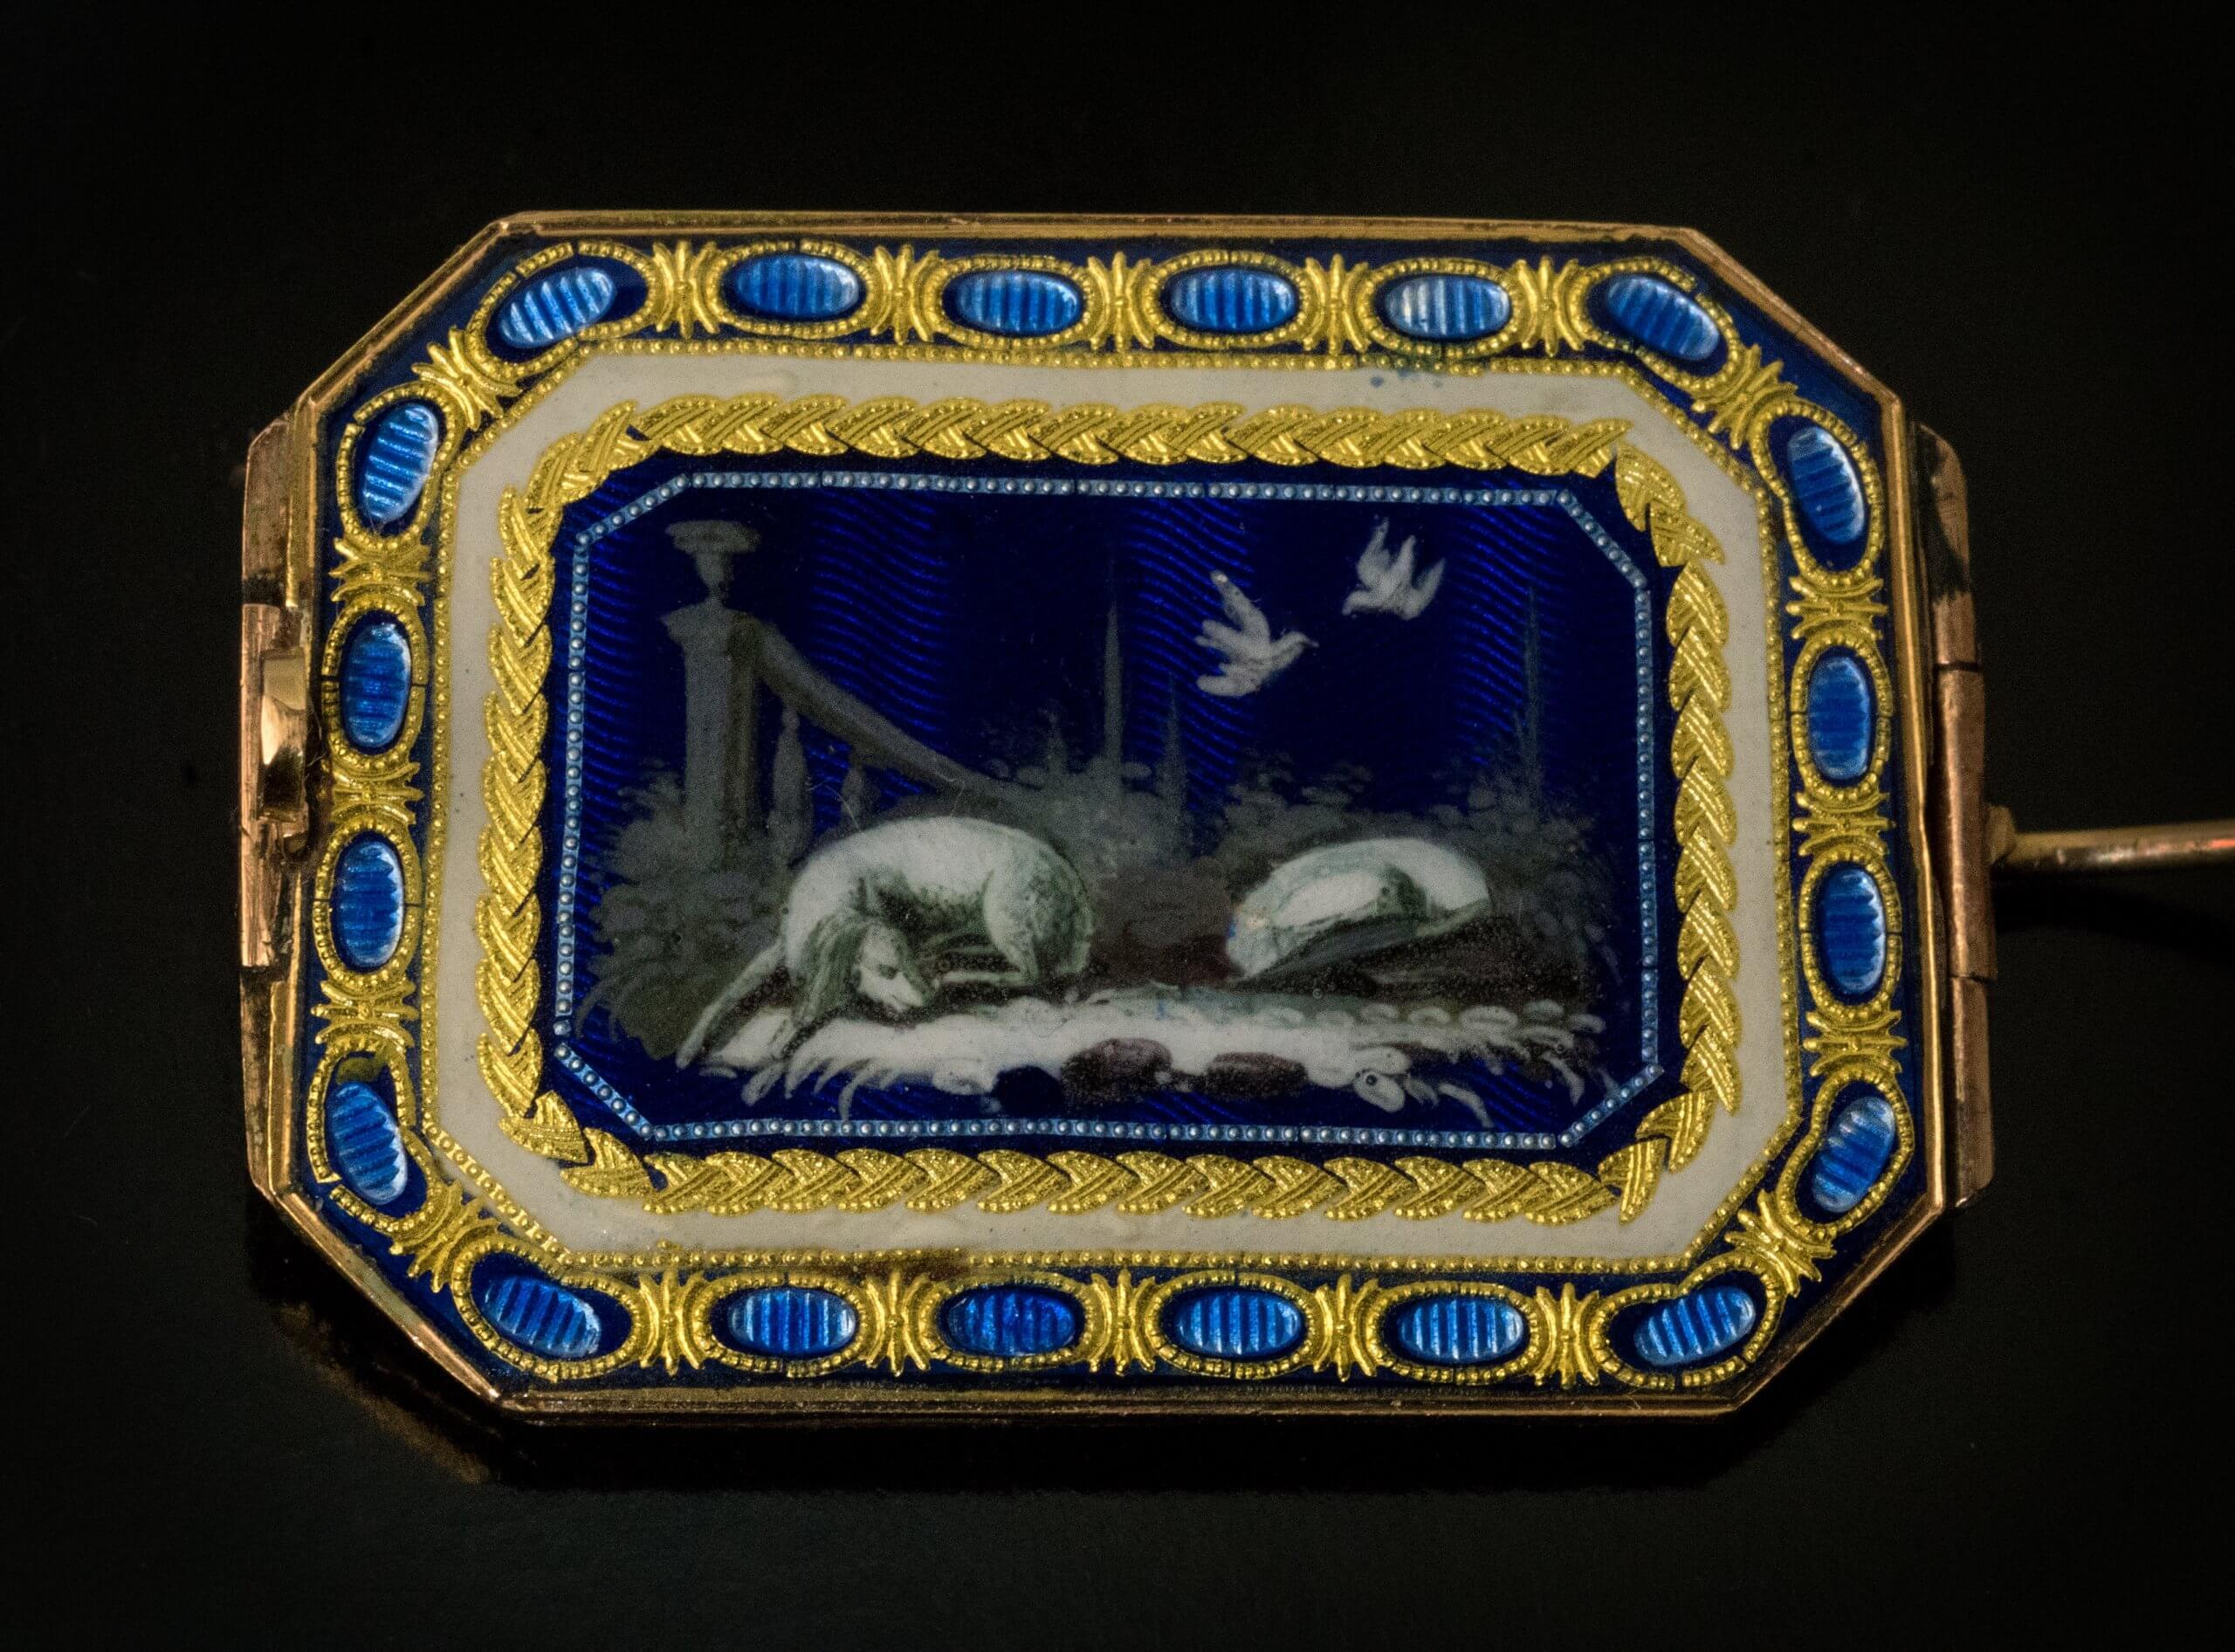 An 18th century enamel on gold brooch embellished with pearls, circa 1790.  The enamel miniature on the front shows a boy flying a kite against a sunny Mediterranean landscape. The backside features a nocturnal scene of a sleeping dog and a pair of